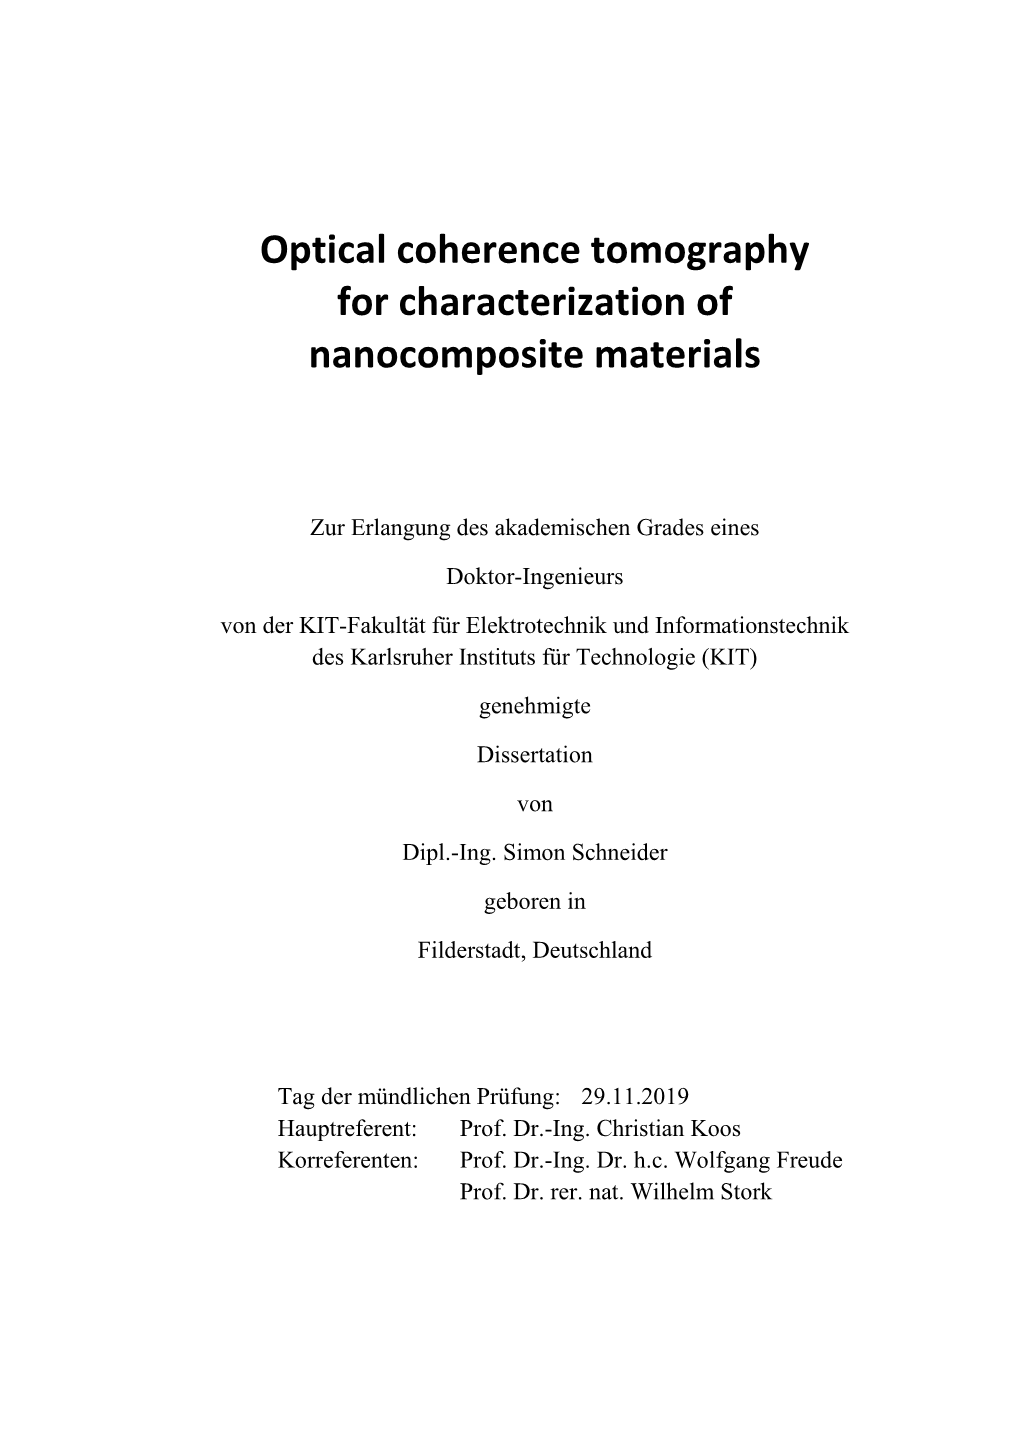 Optical Coherence Tomography for Characterization of Nanocomposite Materials